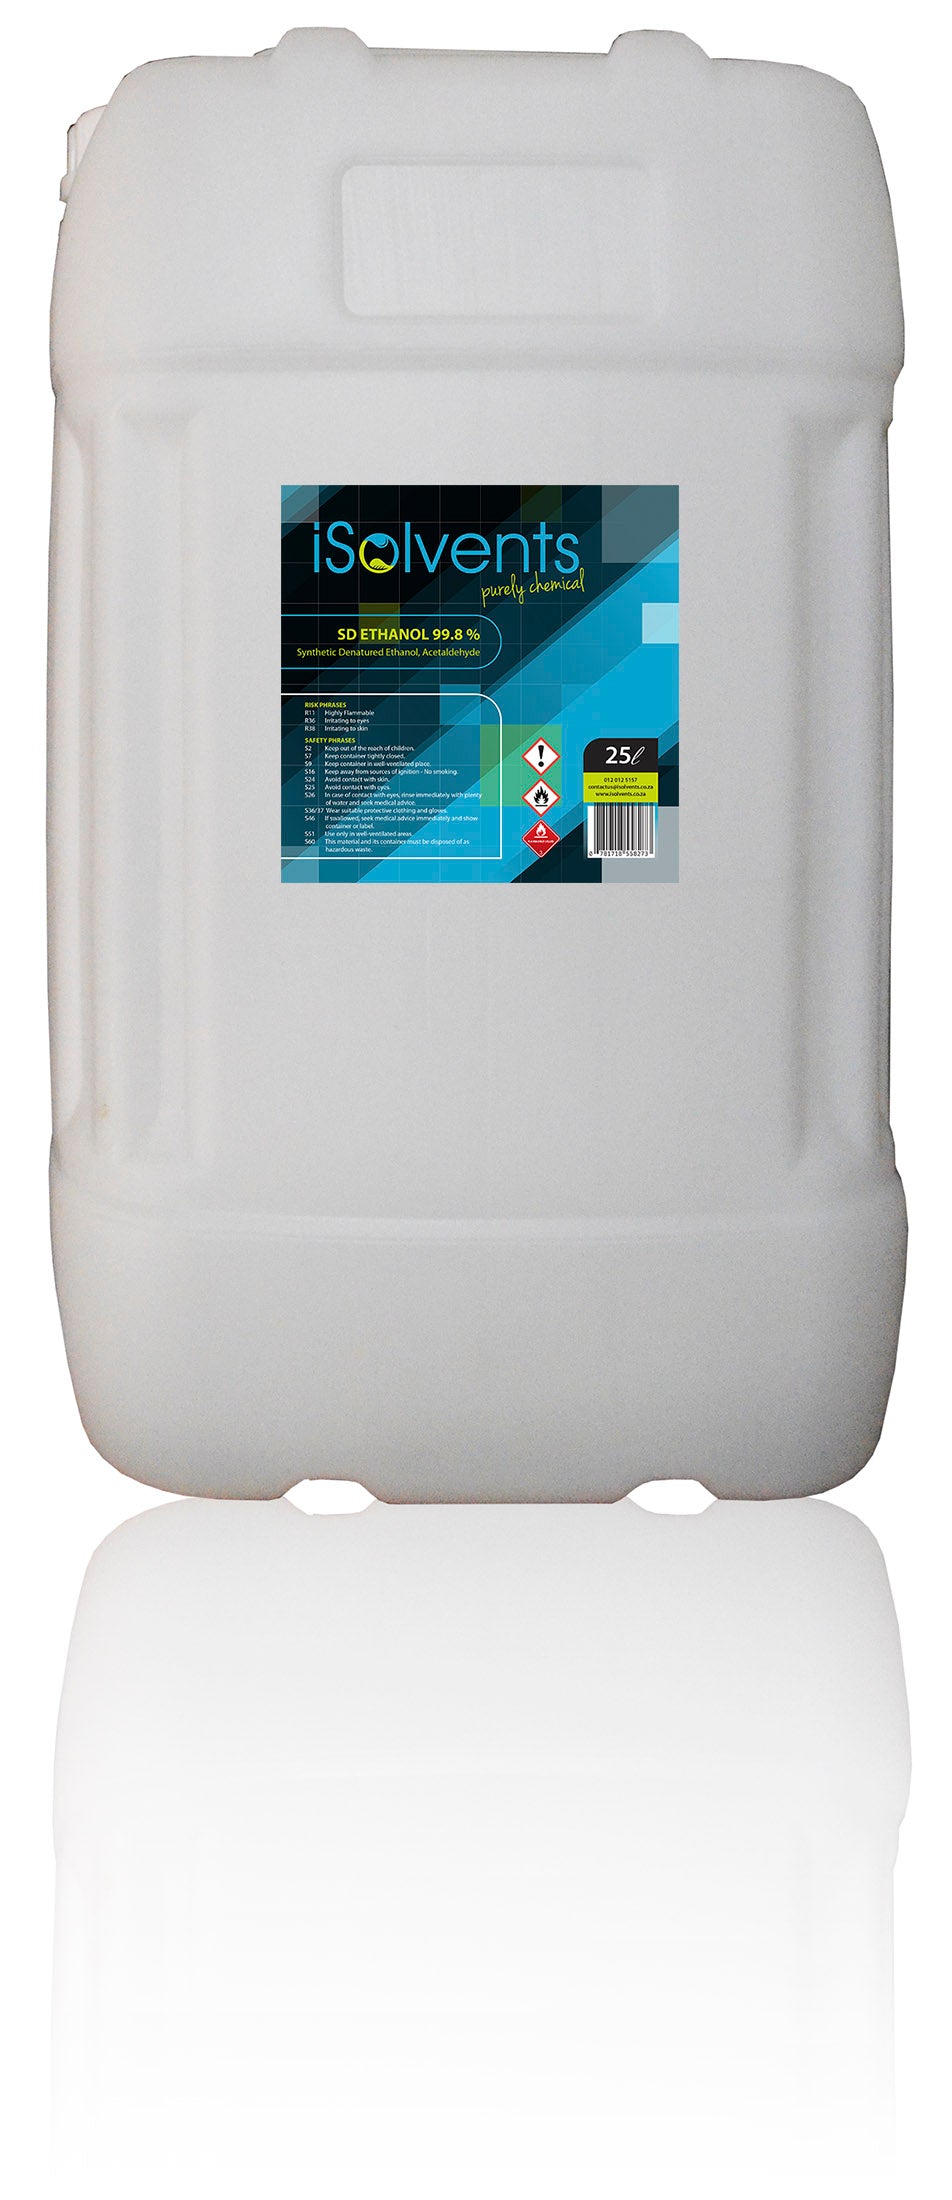 Synthetic denatured ethanol product 90 25l